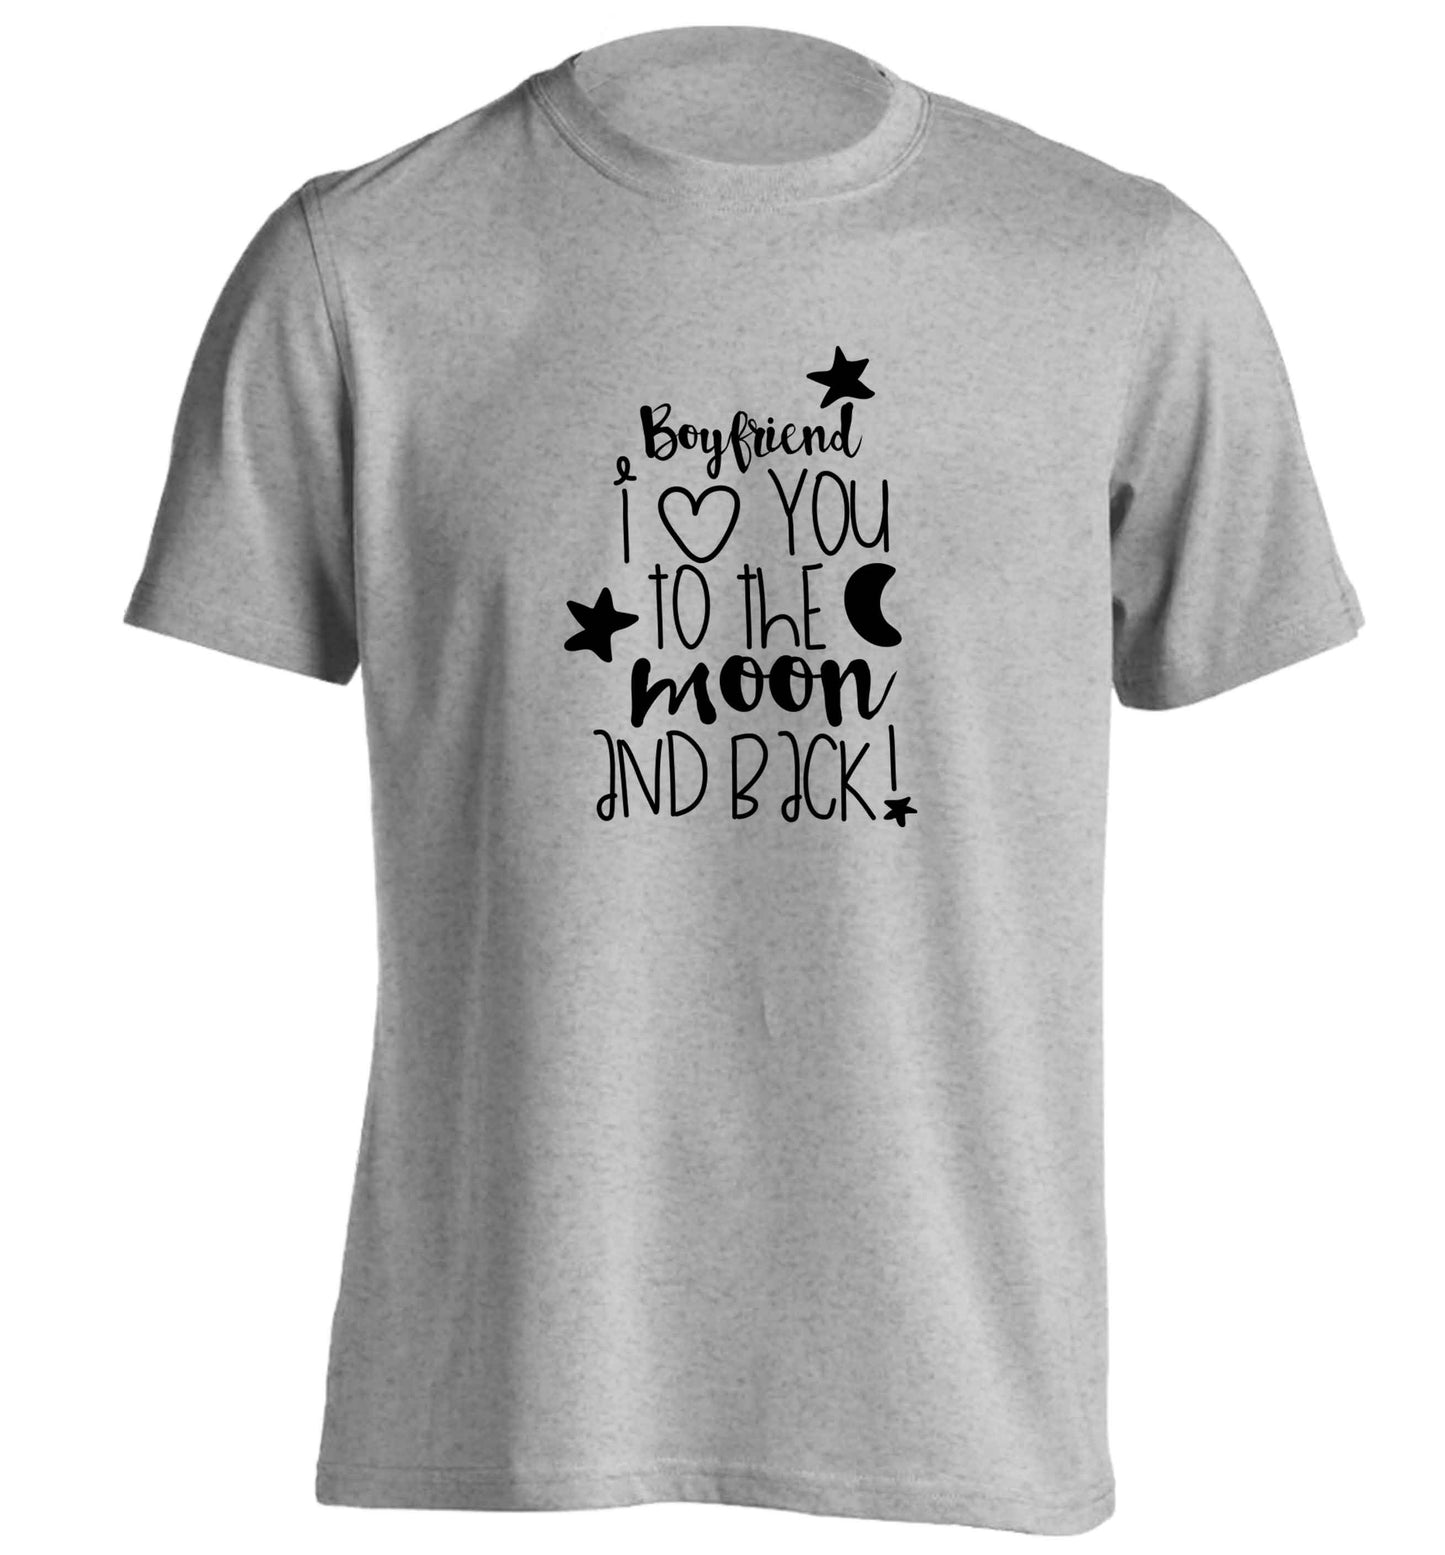 Boyfriend I love you to the moon and back adults unisex grey Tshirt 2XL